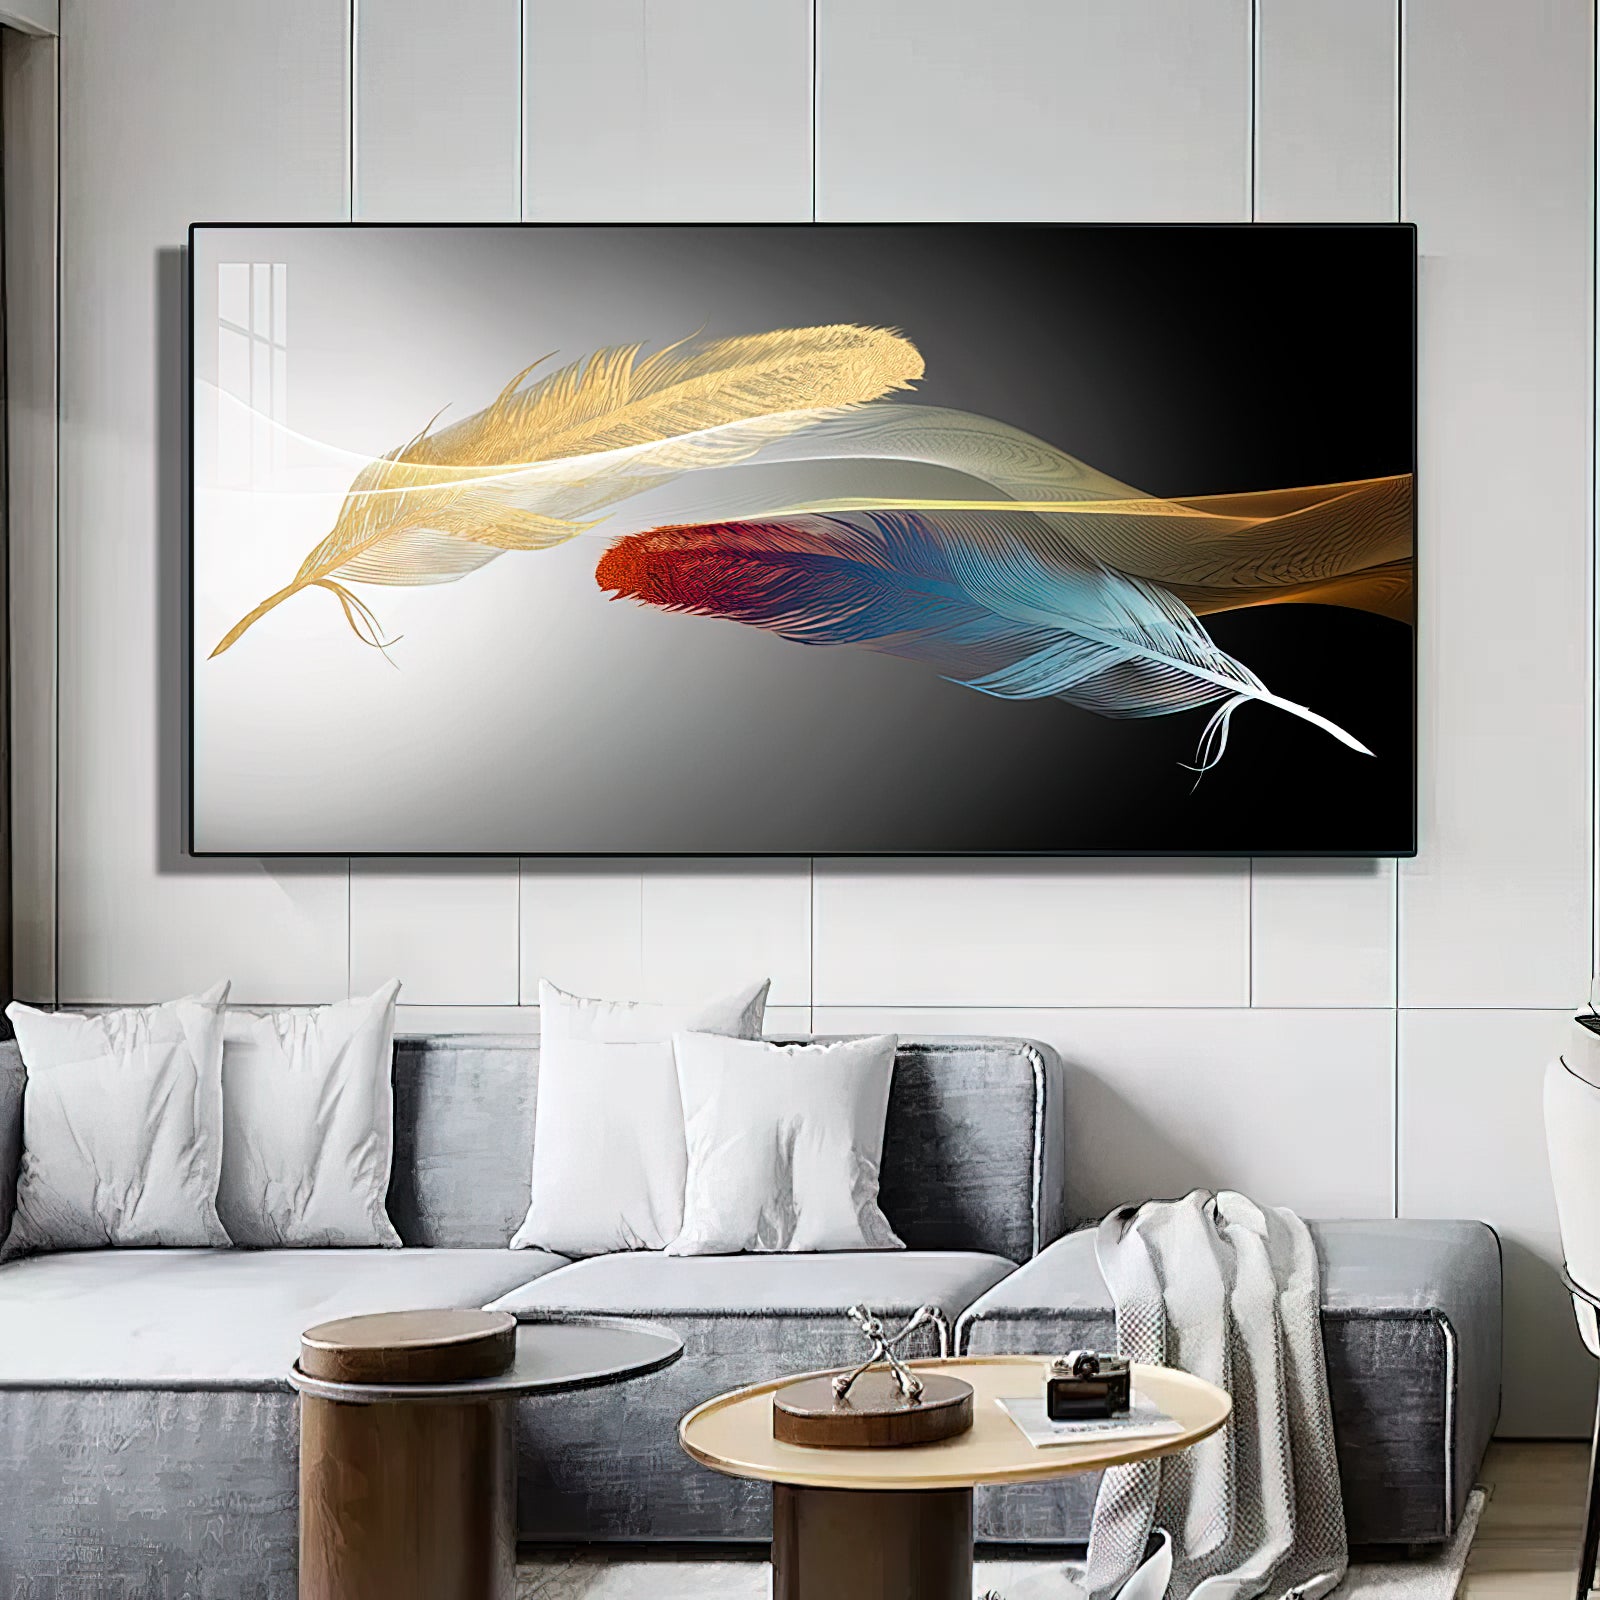 Abstract Feathers Wall Painting - Artistic Home Decor crystal porcelain Framed Large wall wall art wall accents